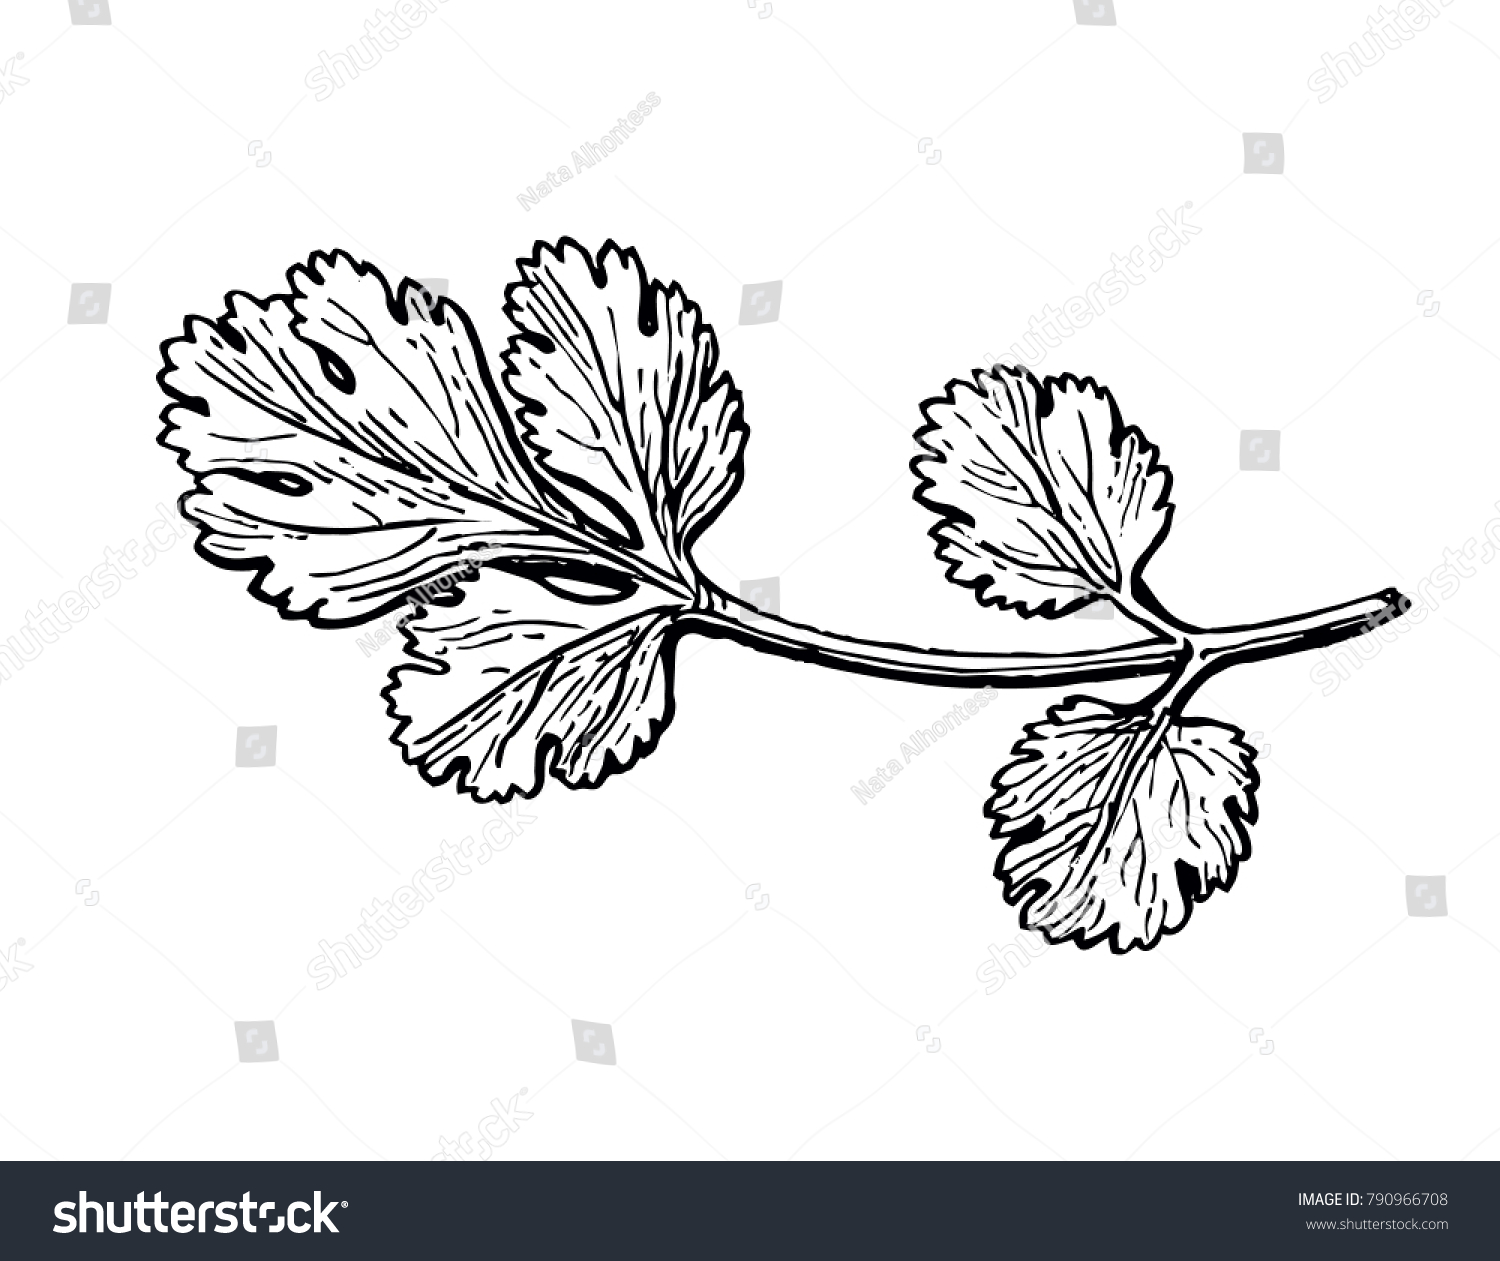 Coriander, also known as cilantro or Chinese parsley. Ink sketch isolated on white background. Hand drawn vector illustration. Retro style. #790966708